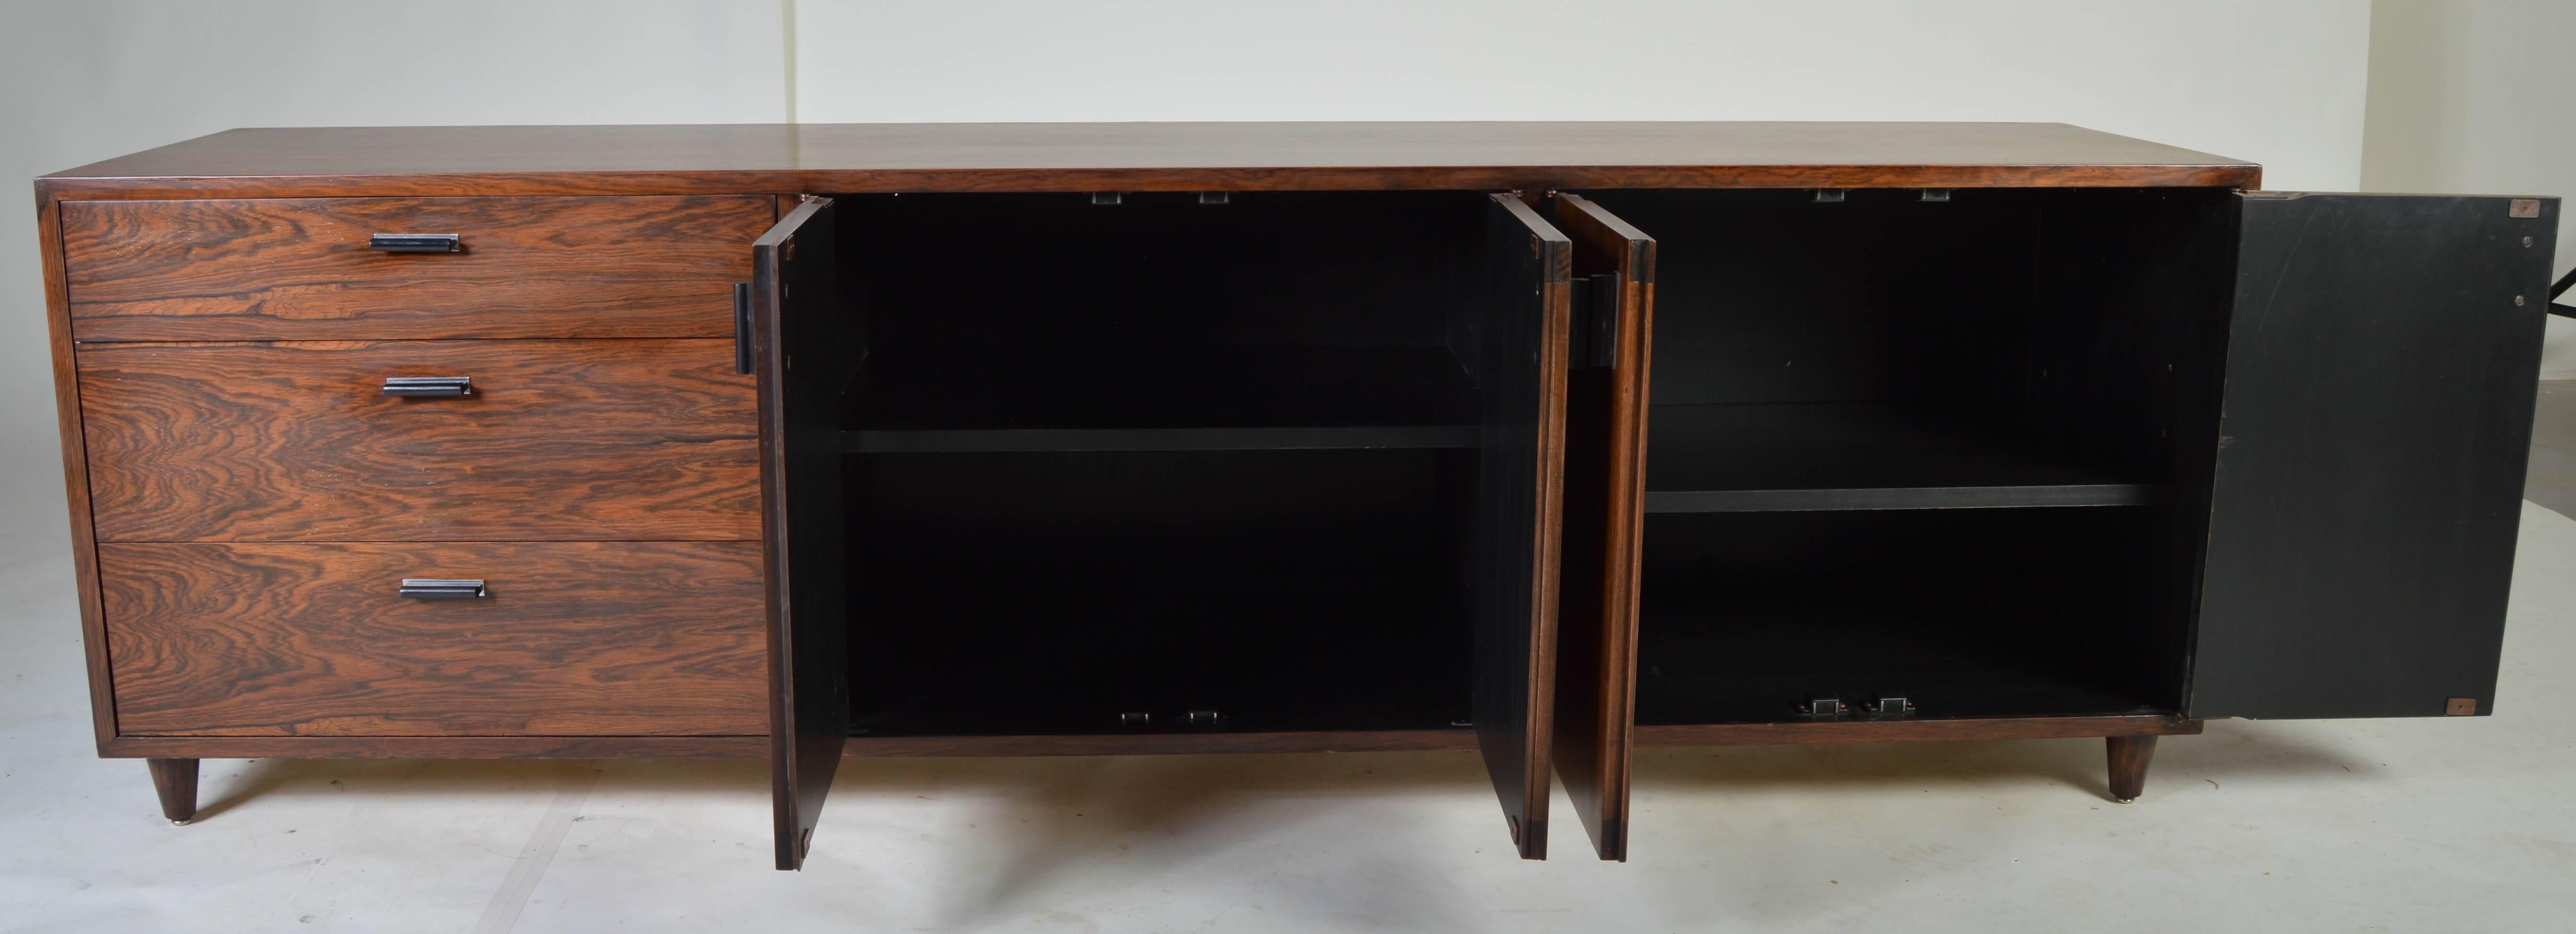 An incredibly rare, early 1950s rosewood credenza by Founders after George Nelson. A truly beautiful piece.